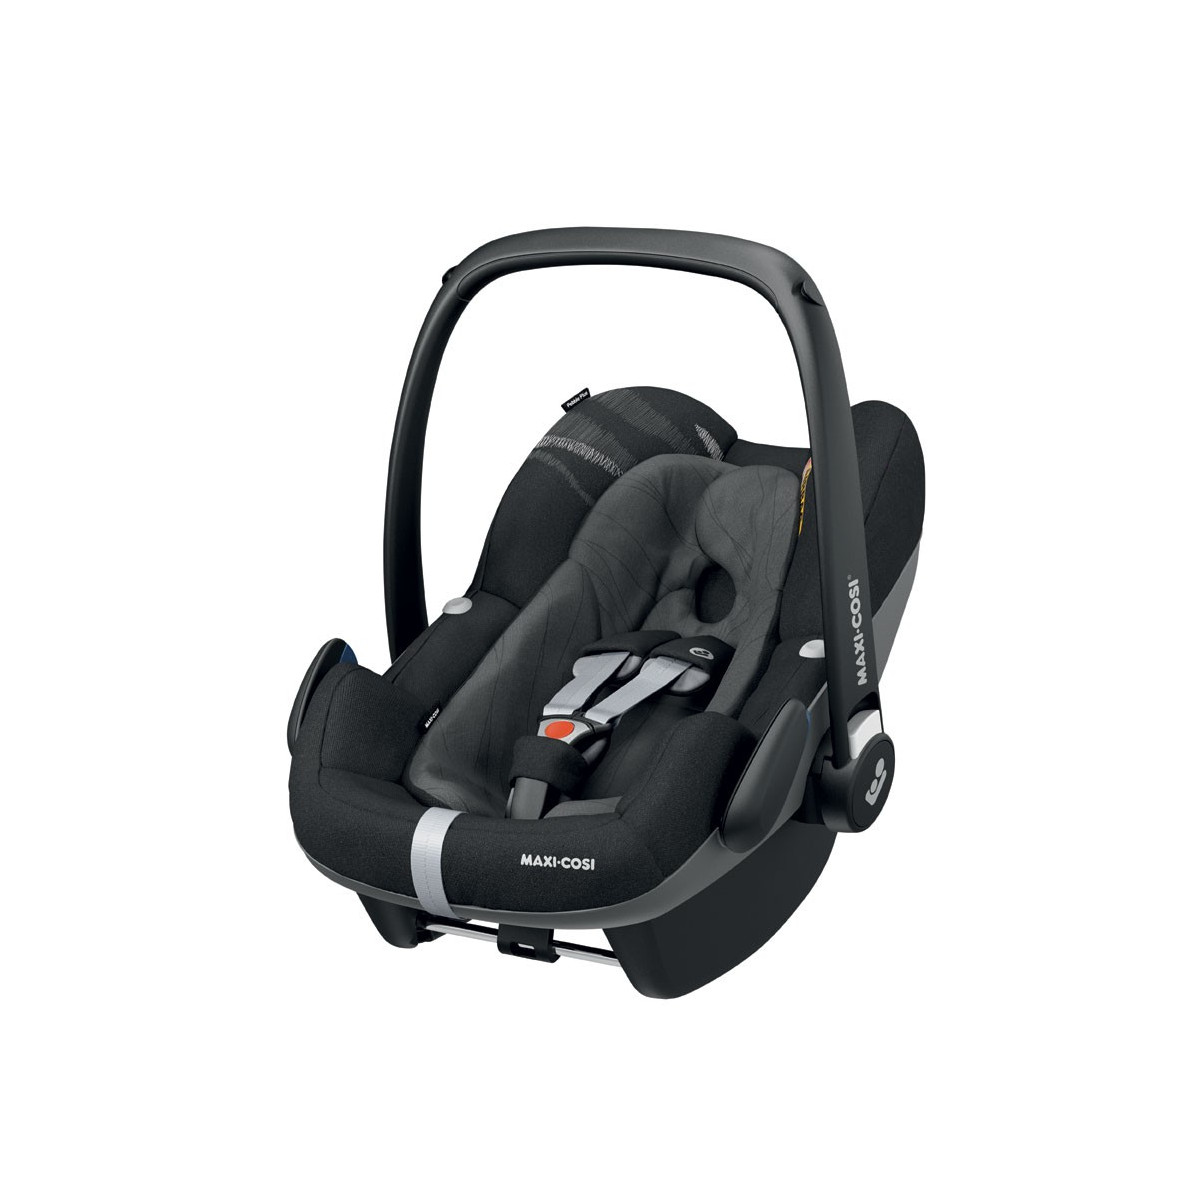 Maxi Cosi Pebble Plus Group 0 Car Seat Frequency Black - Maxi Cosi Pebble Plus Car Seat And Isofix Base